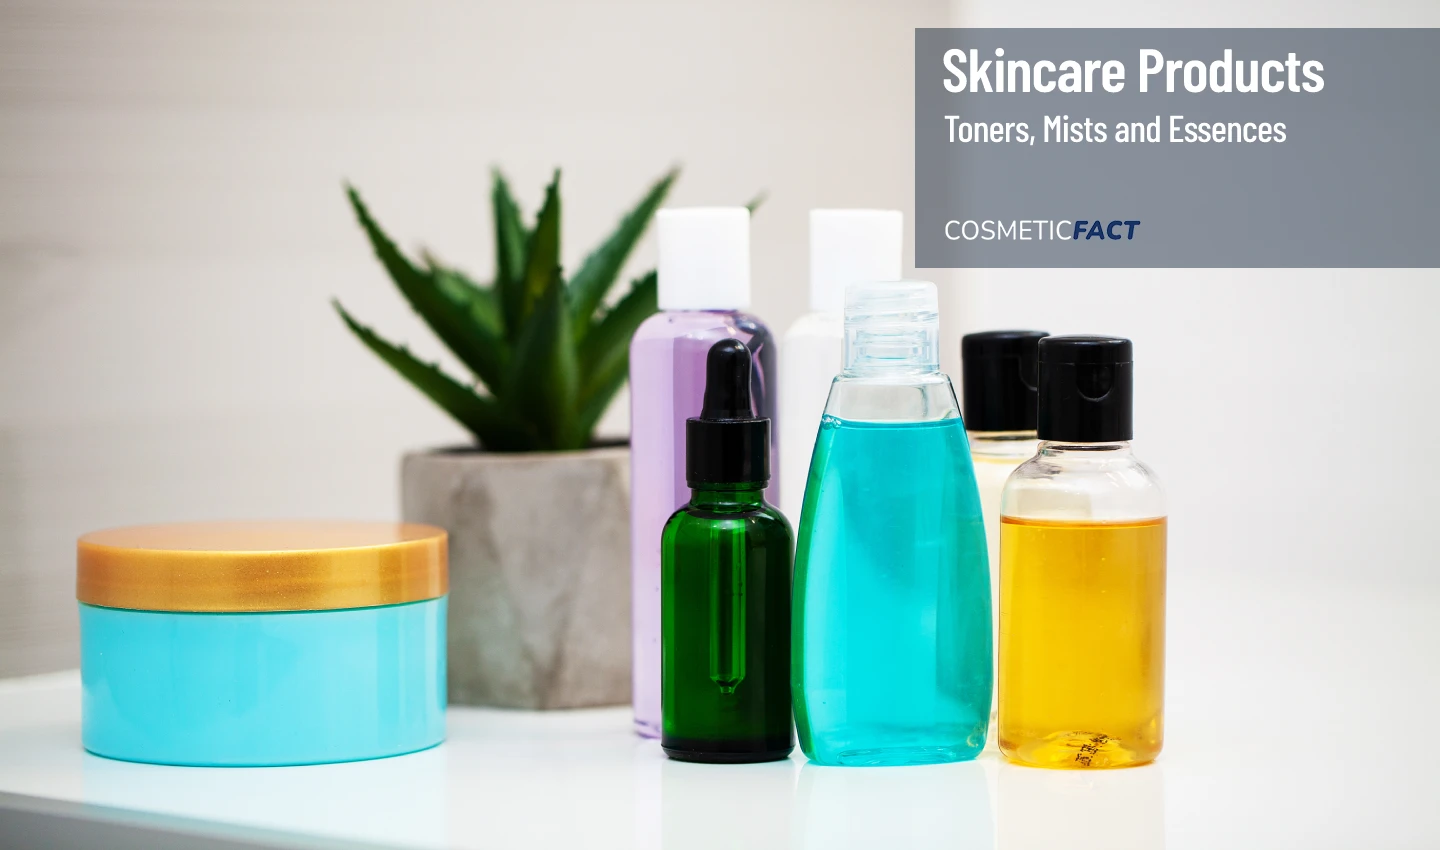 Skincare toners of different brands and types are arranged on a table, highlighting the importance of choosing the right toner for your skin type.